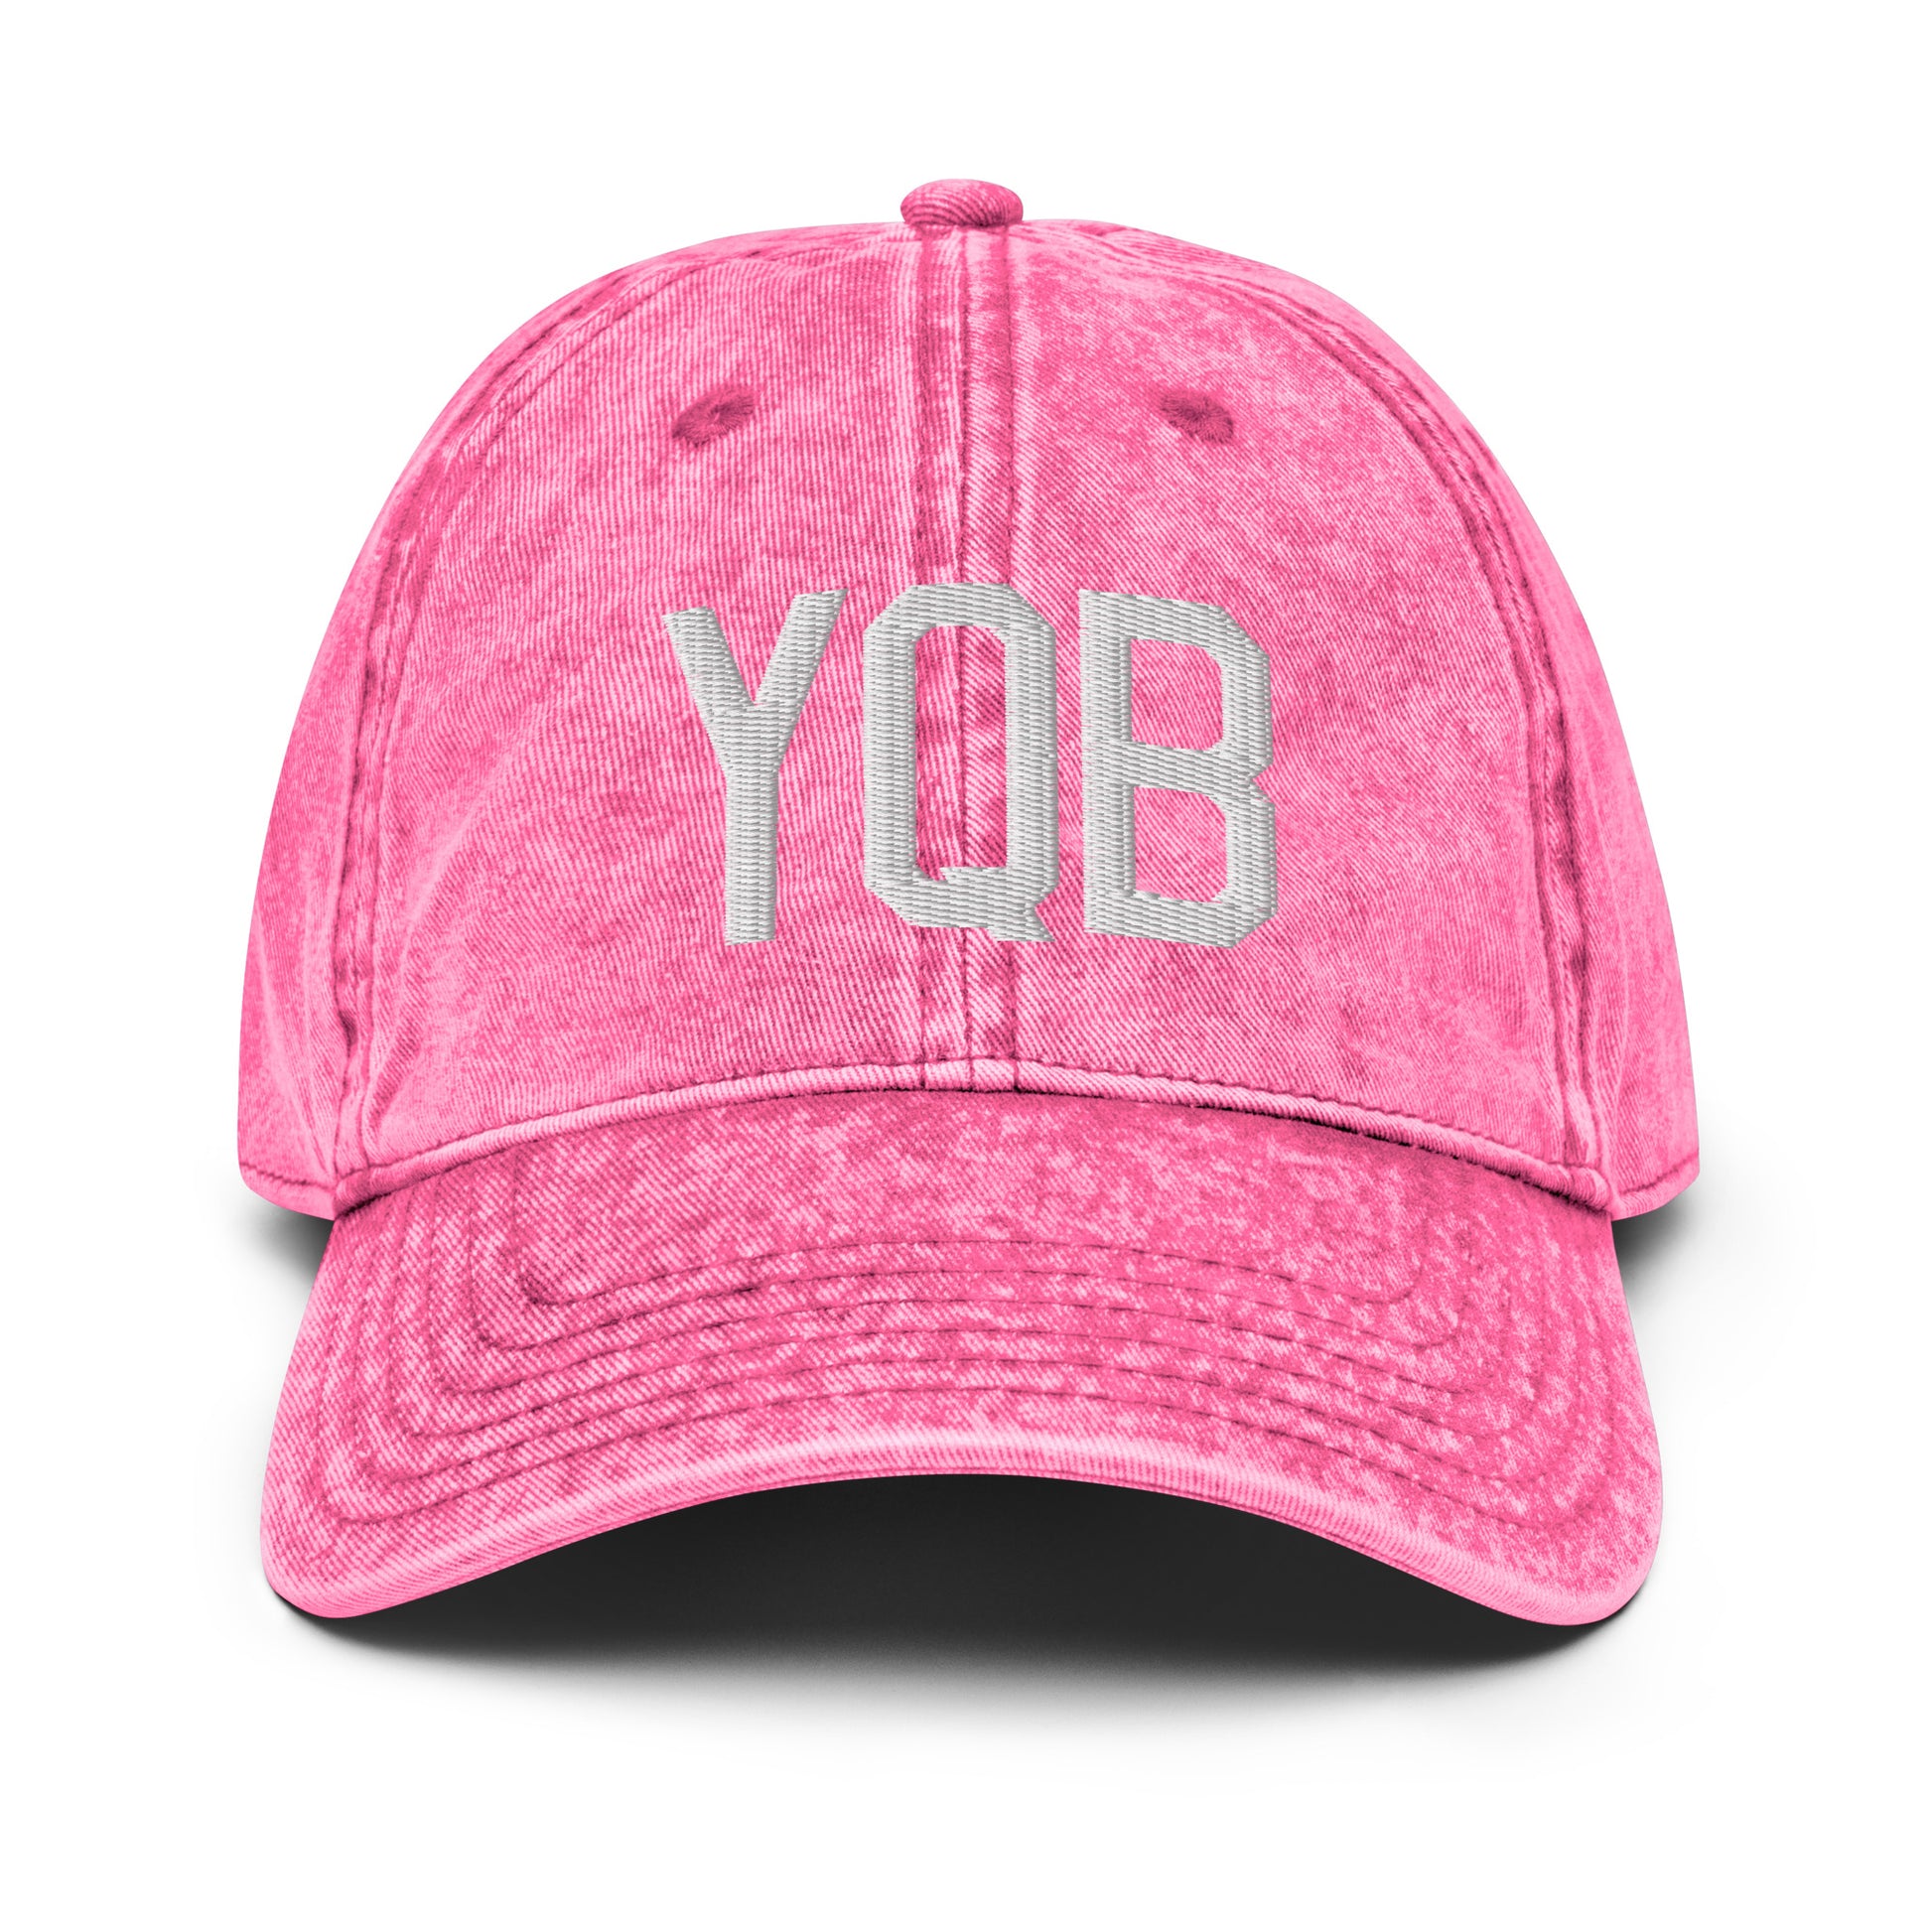 Airport Code Twill Cap - White • YQB Quebec City • YHM Designs - Image 25